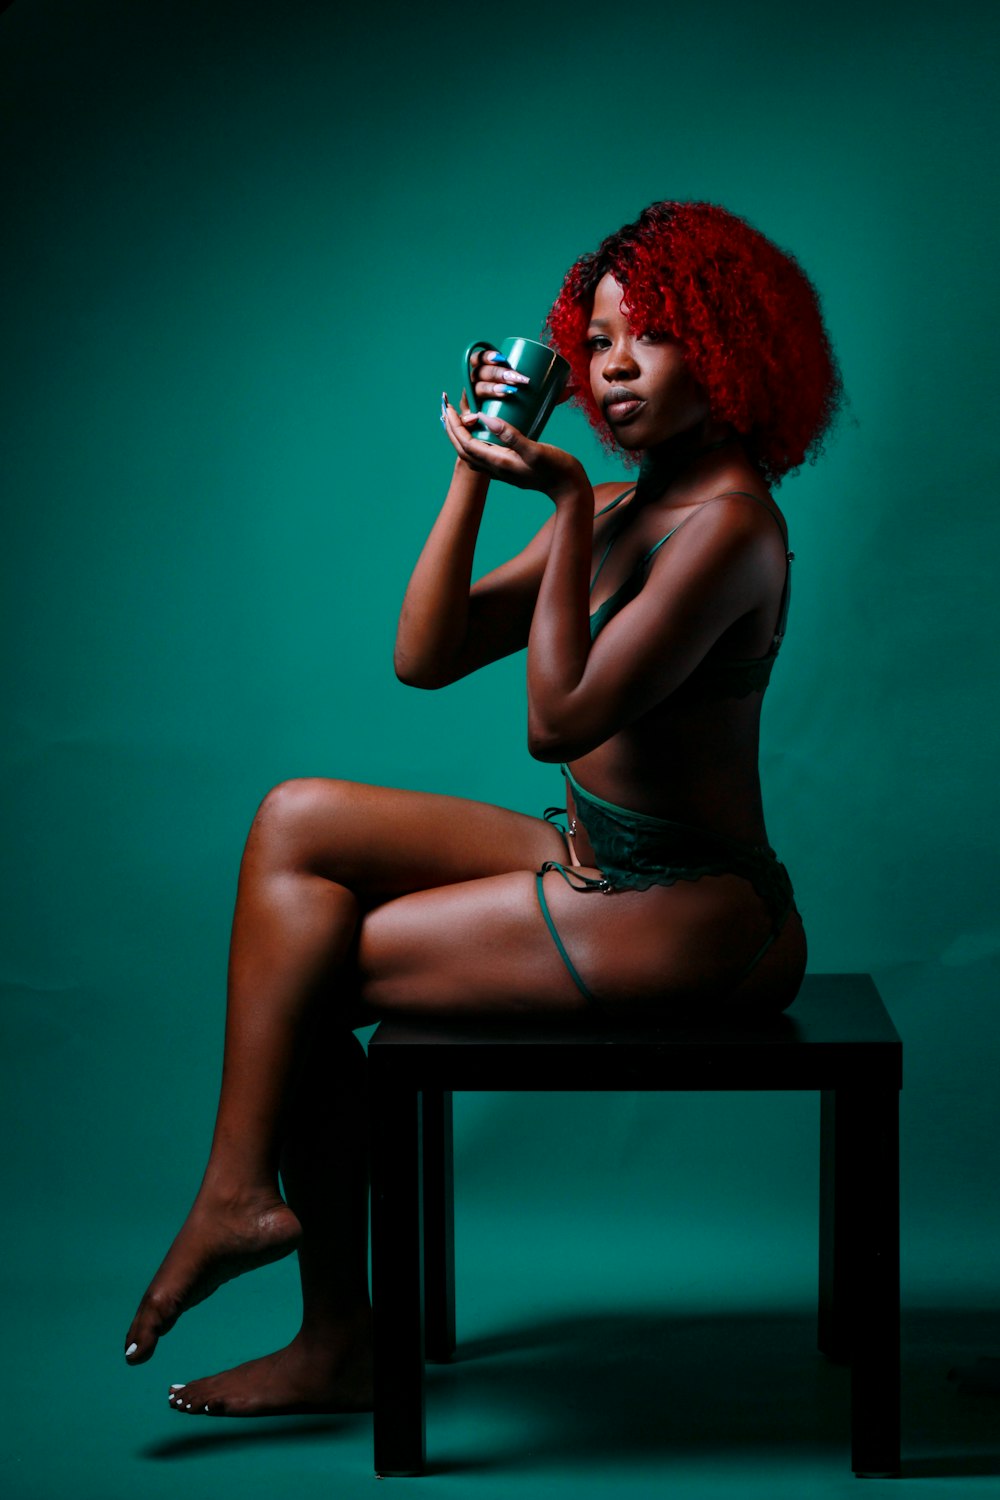 a woman with red hair sitting on a stool holding a cup